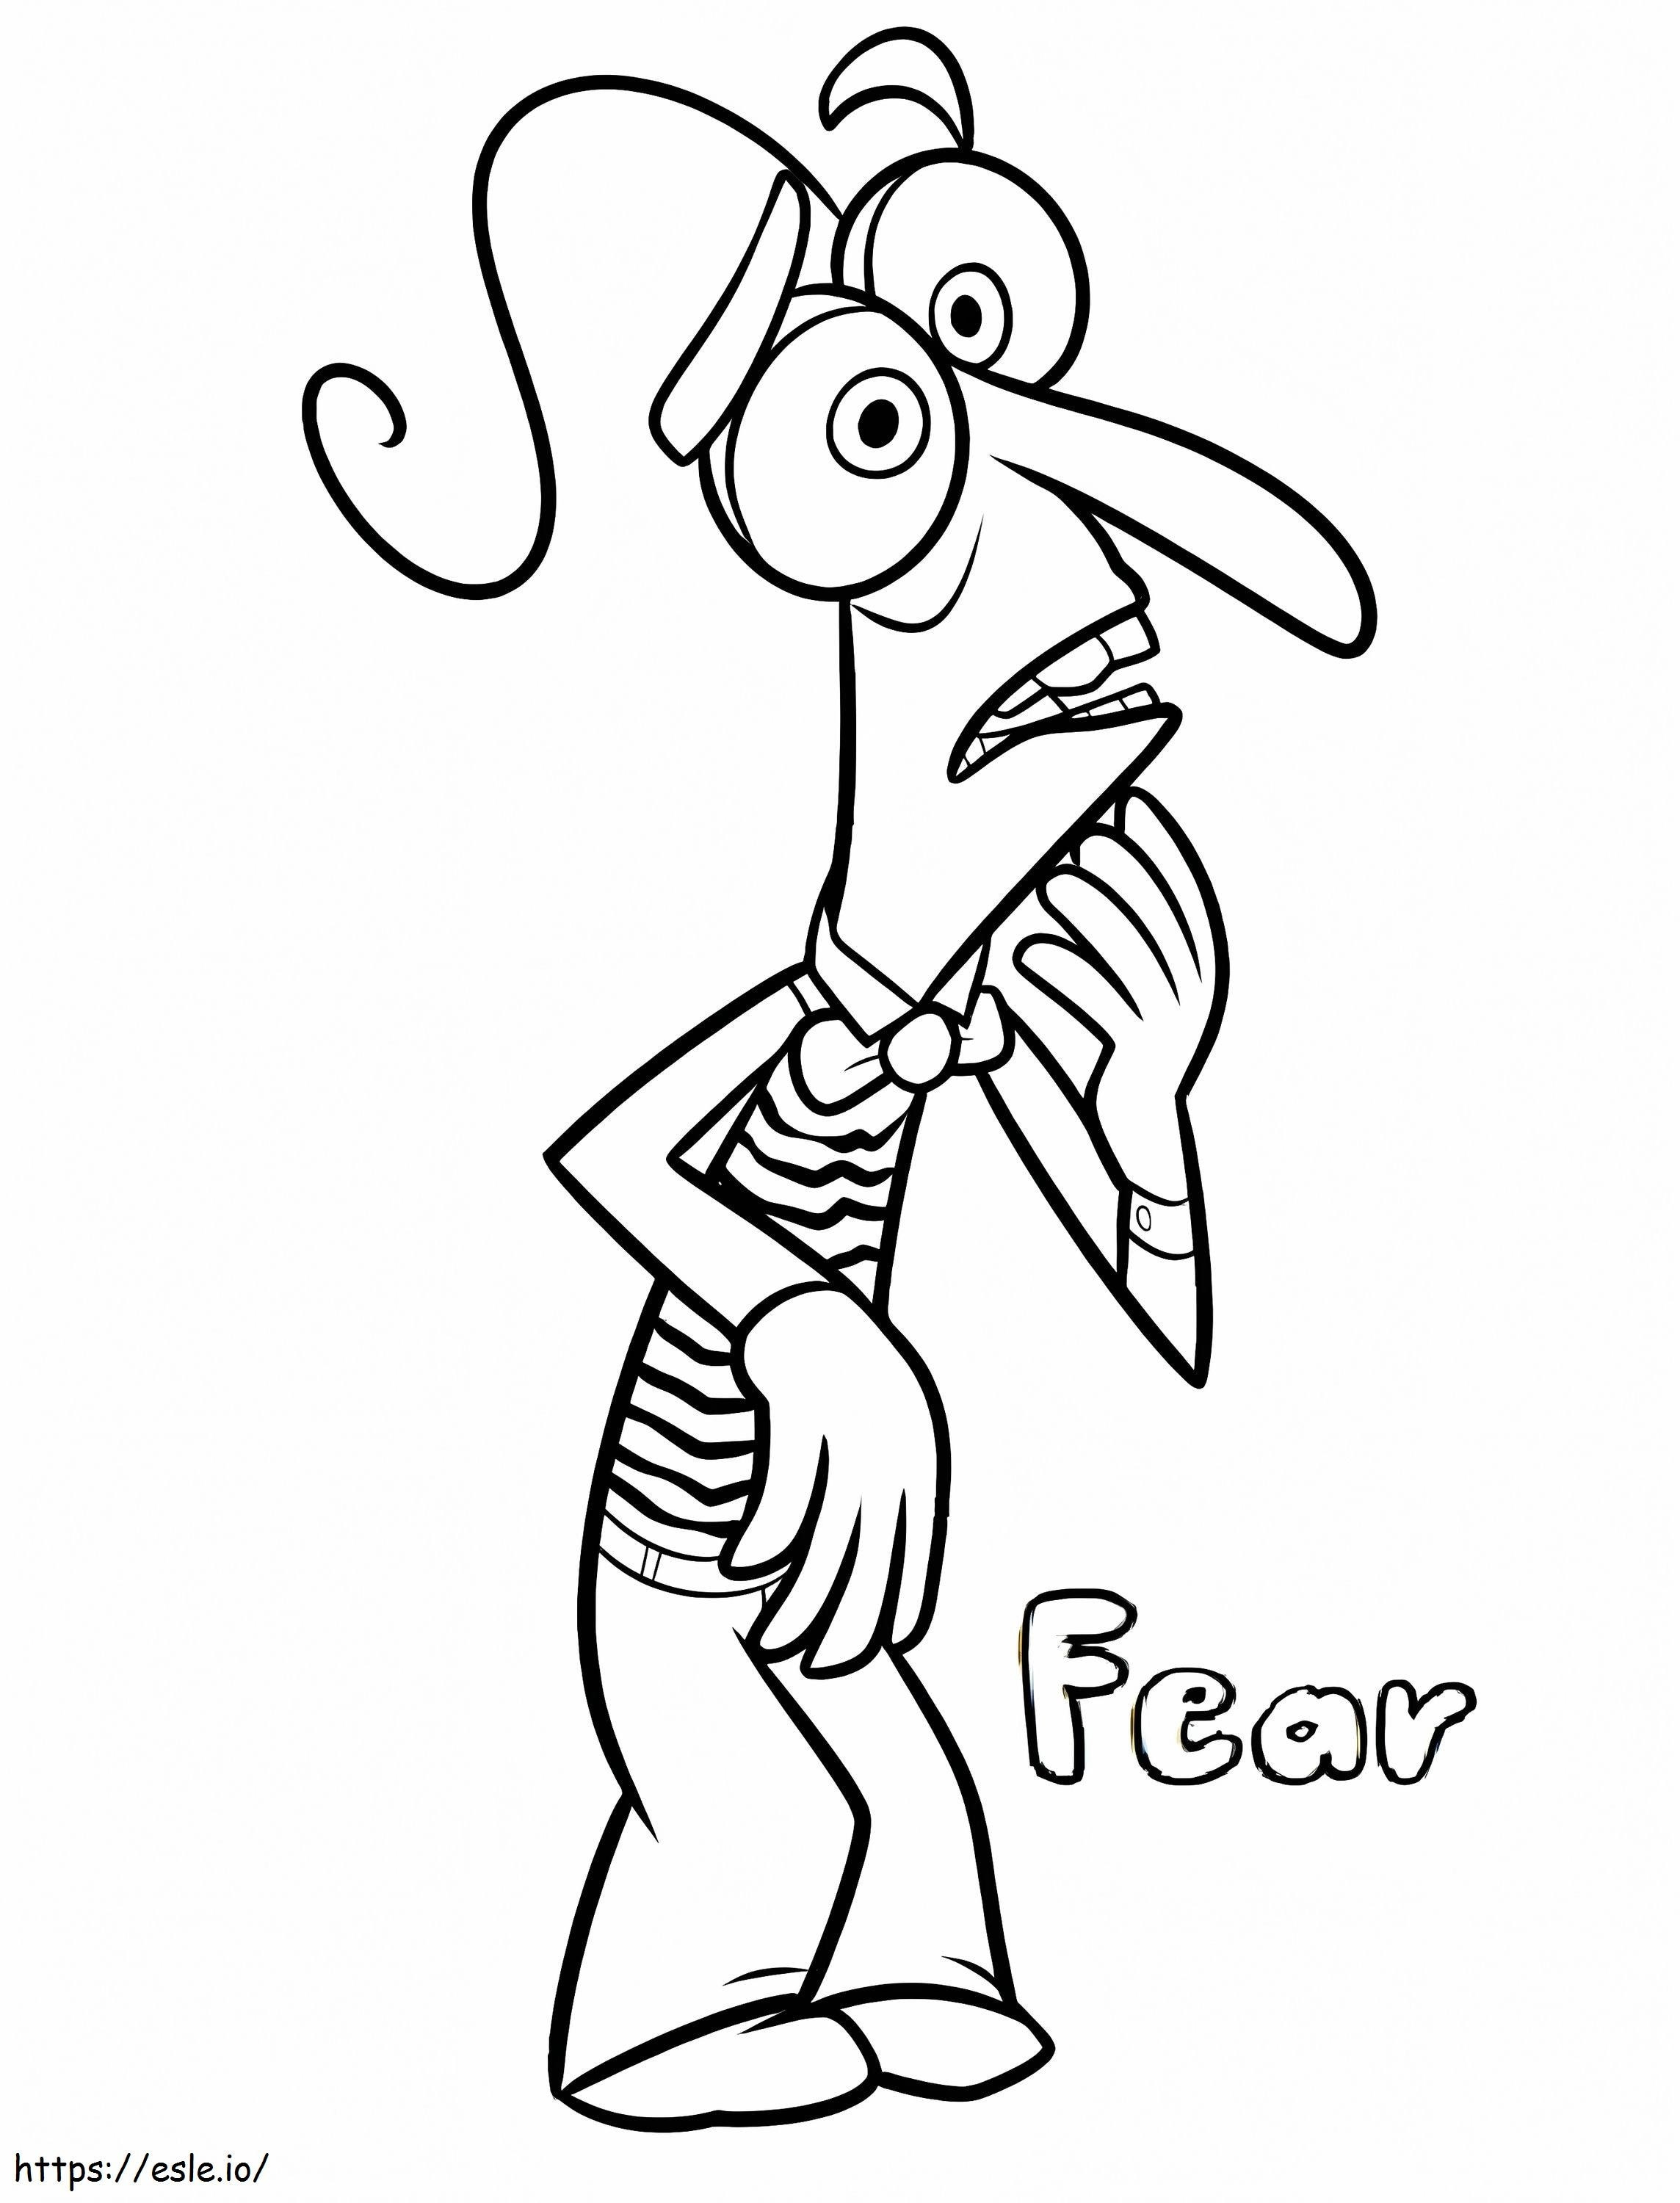 Fear From The Inside Out coloring page